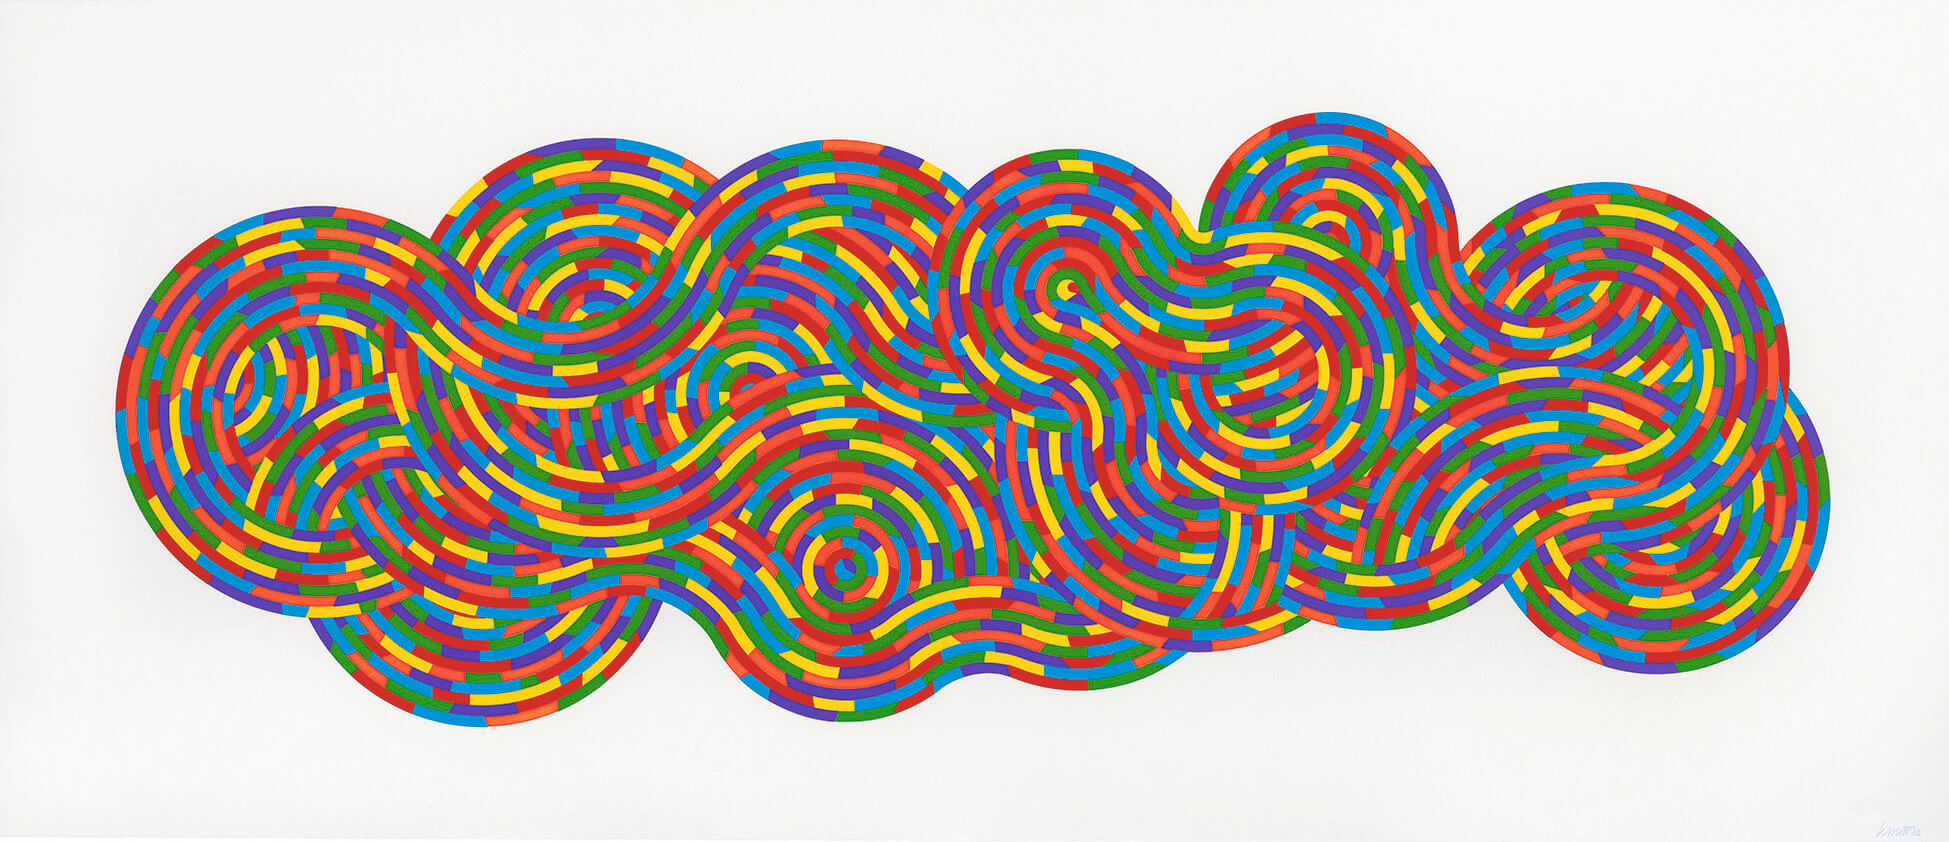 Sol LeWitt's 'Whirls and Twirls' is on display as part of ''Strict Beauty: Sol LeWitt Prints,' the most comprehensive exhibit to date of LeWitt's work.